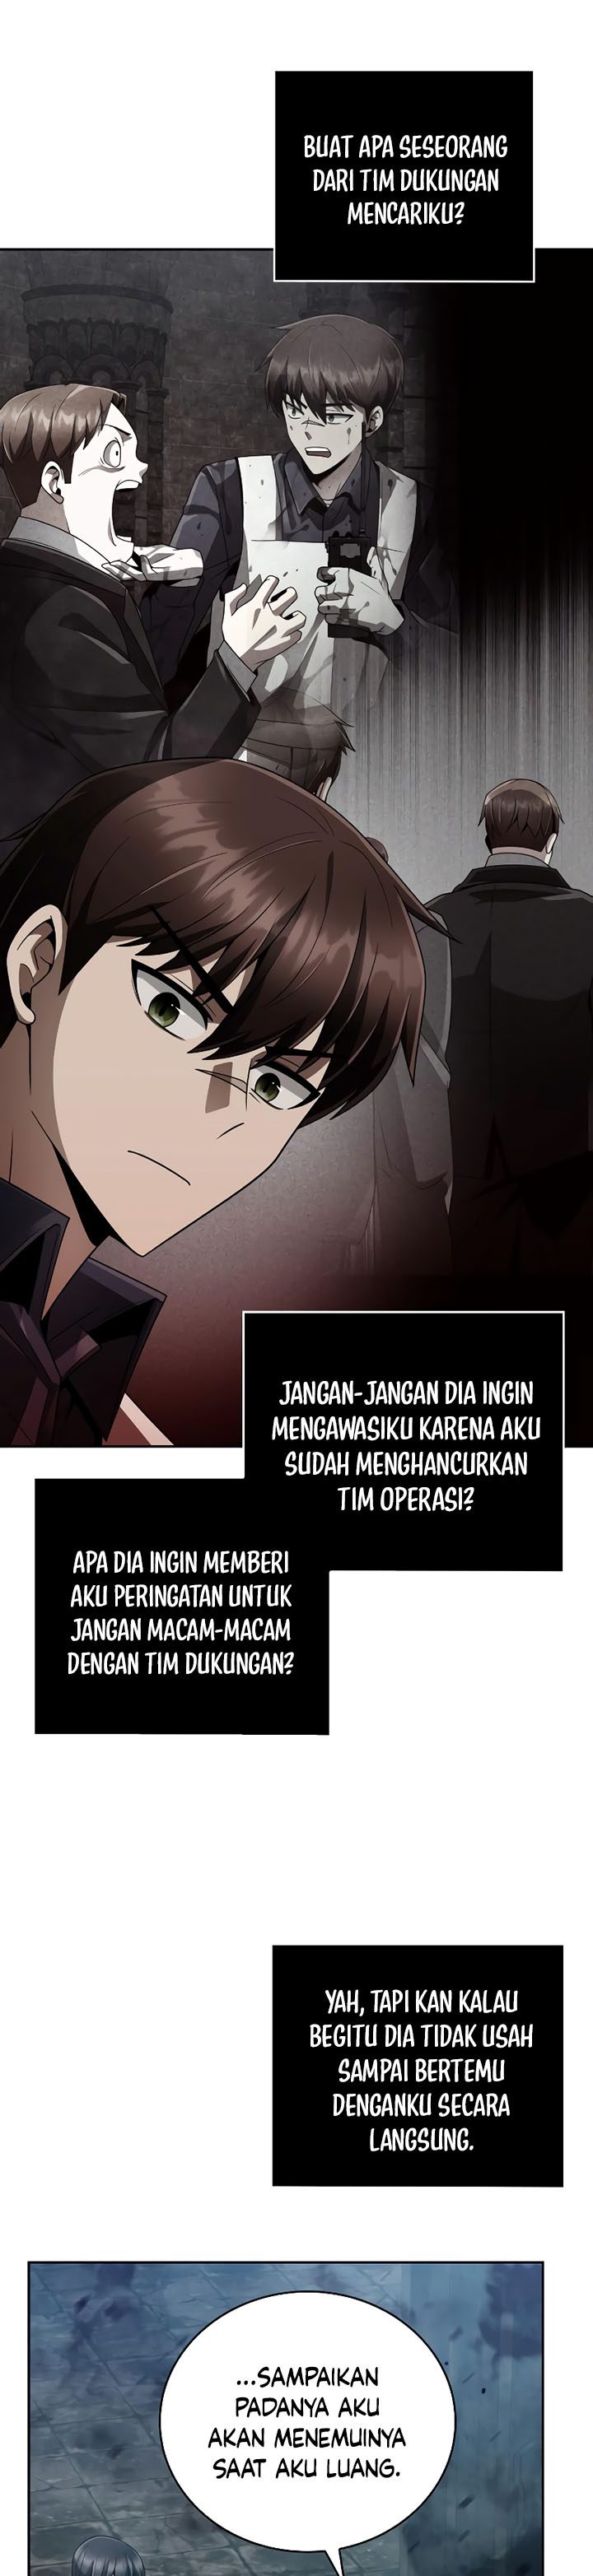 Dilarang COPAS - situs resmi www.mangacanblog.com - Komik clever cleaning life of the returned genius hunter 019 - chapter 19 20 Indonesia clever cleaning life of the returned genius hunter 019 - chapter 19 Terbaru 19|Baca Manga Komik Indonesia|Mangacan